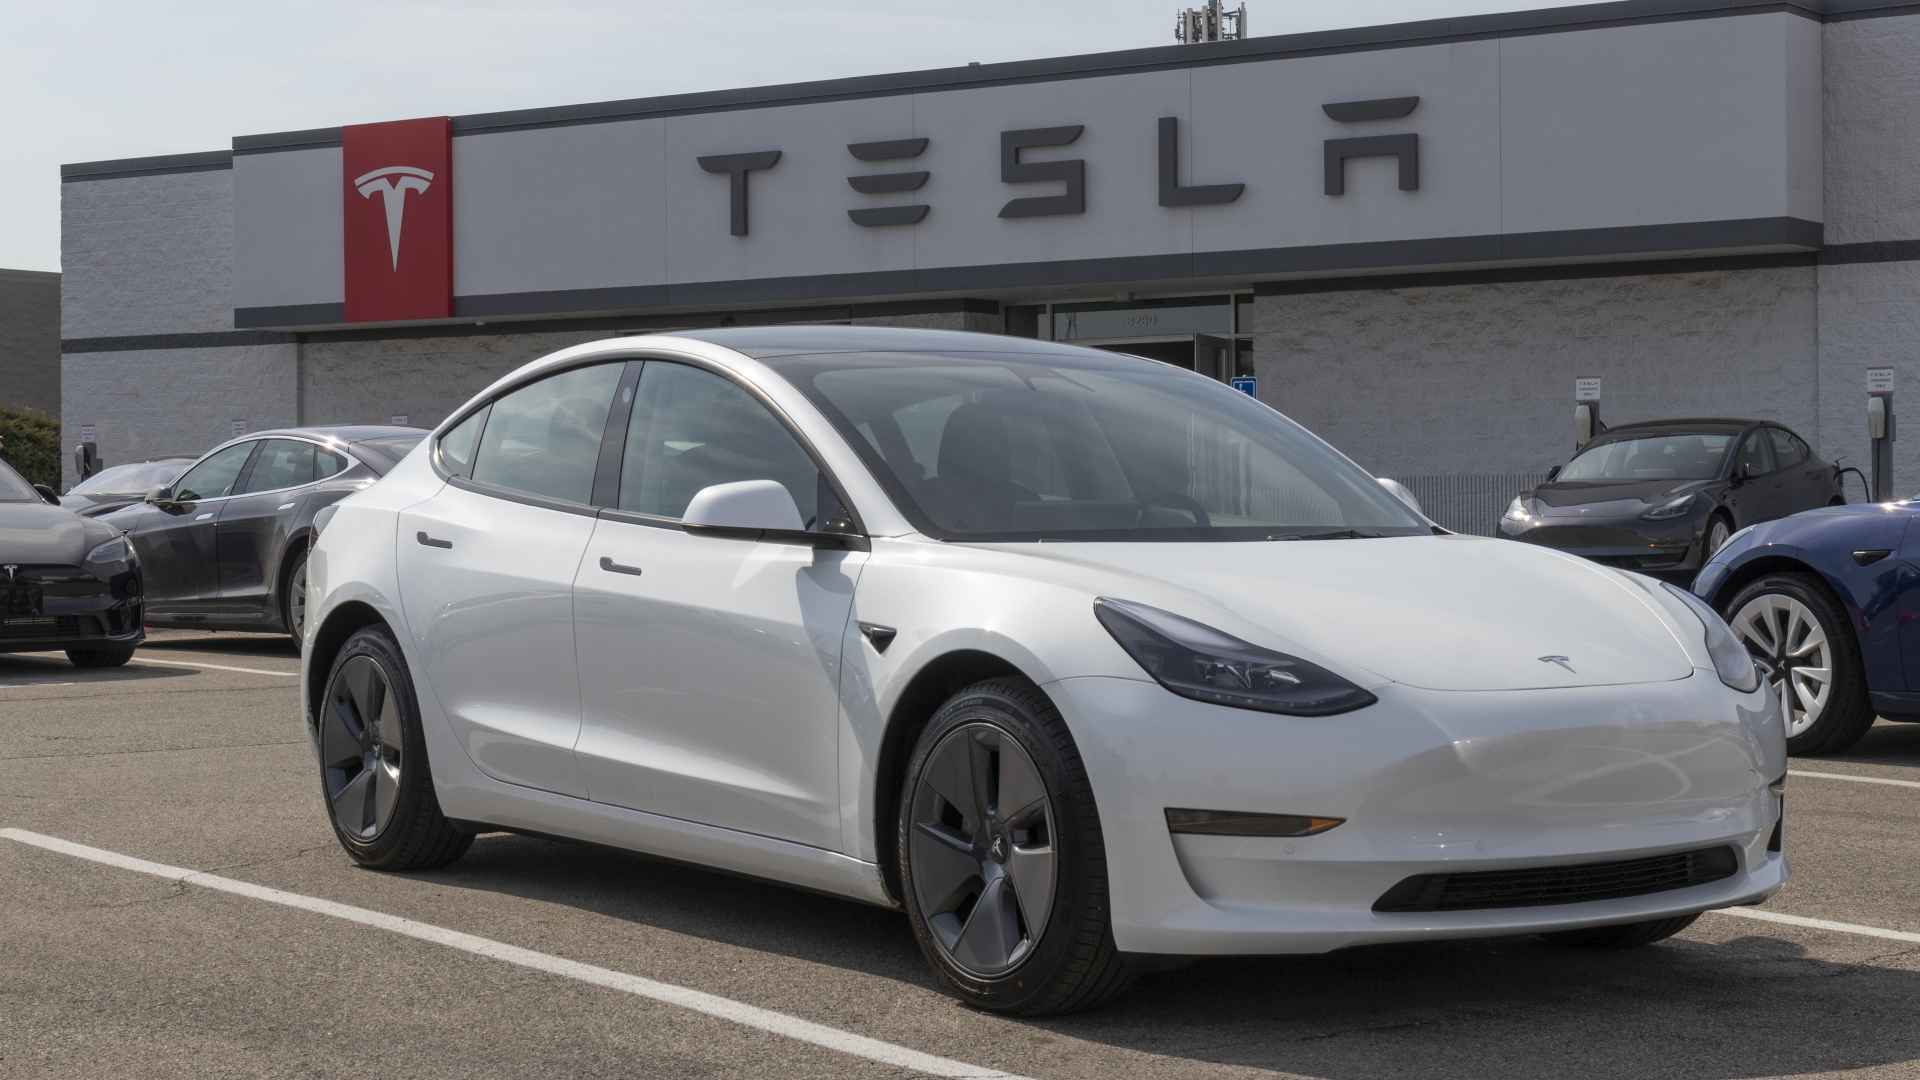 7 best business & money lessons to learn from tesla